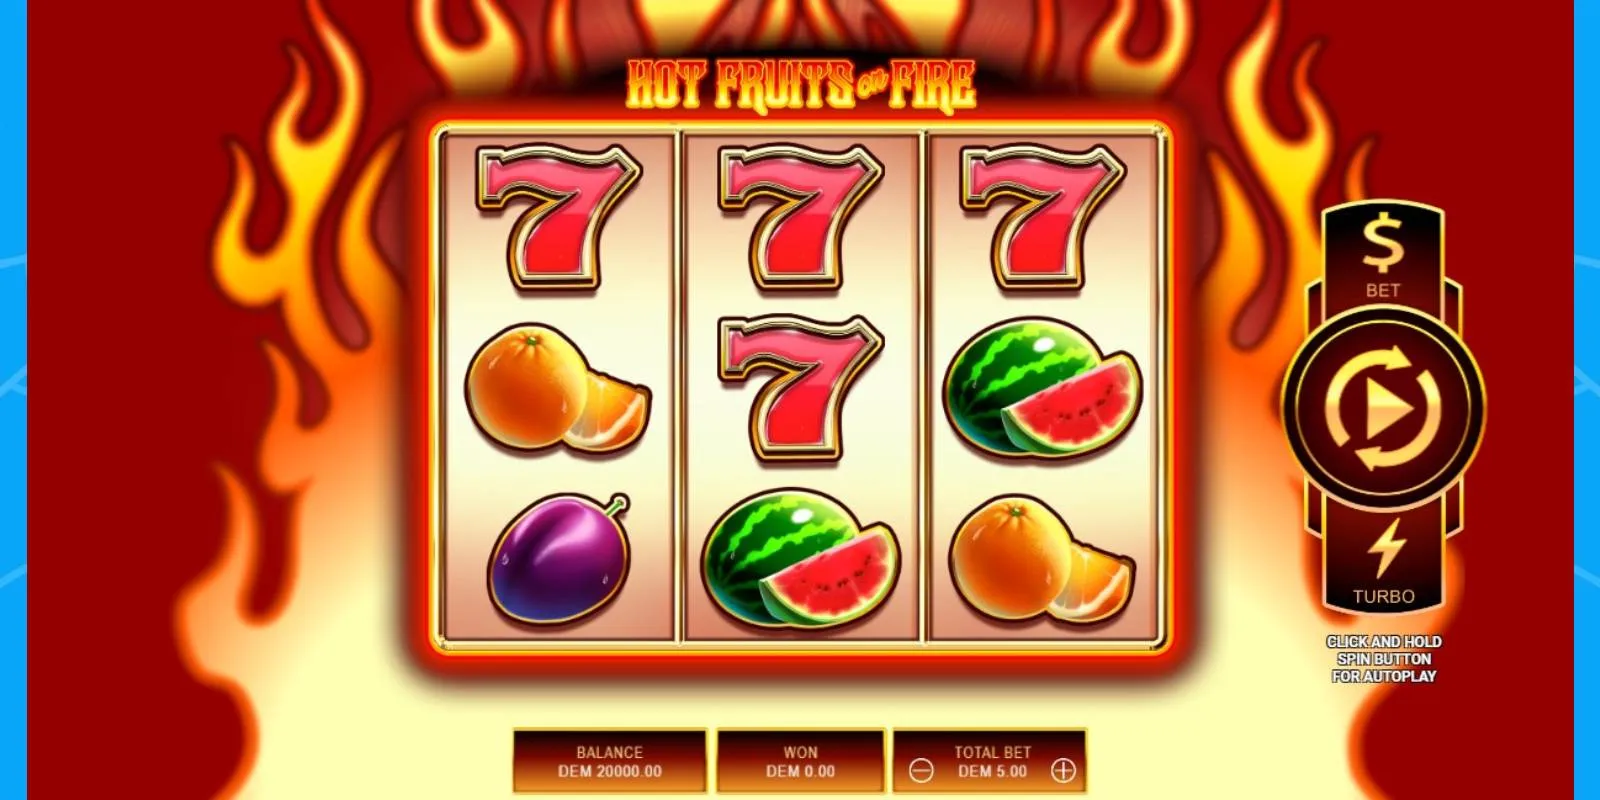 Hot Fruits on Fire Pokie